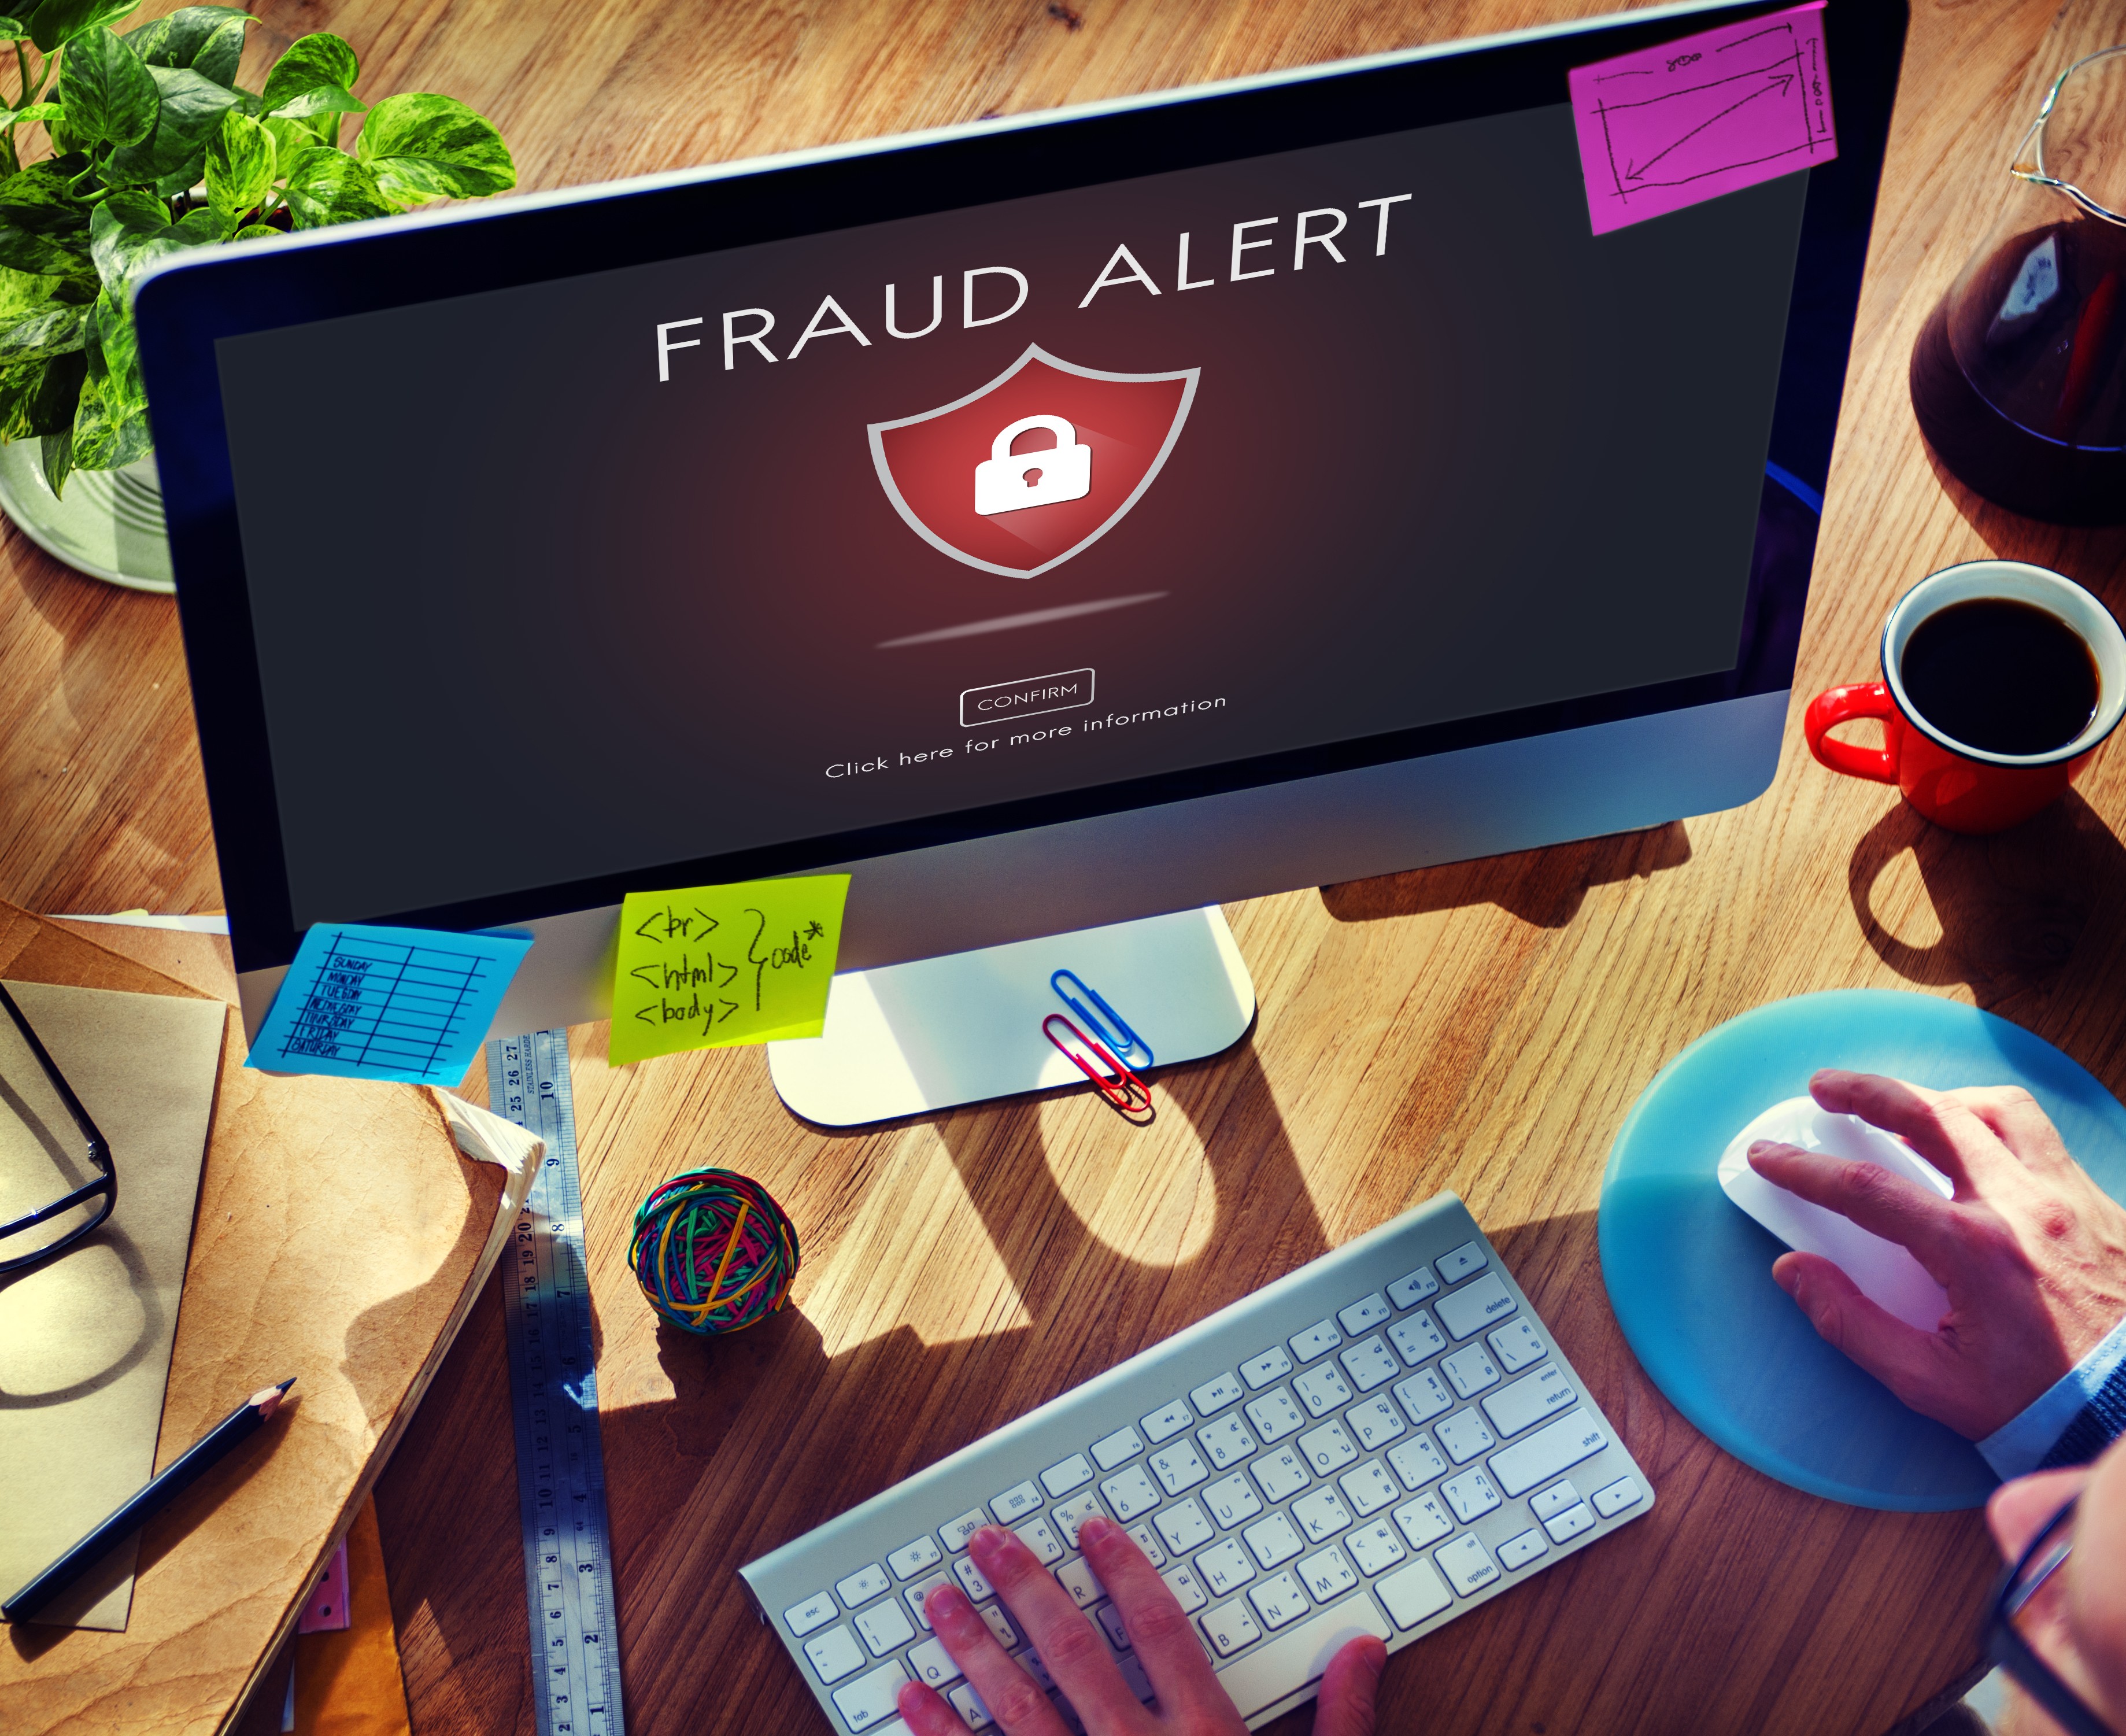 Online shop scams are on the rise in Hong Kong. Photo: Shutterstock